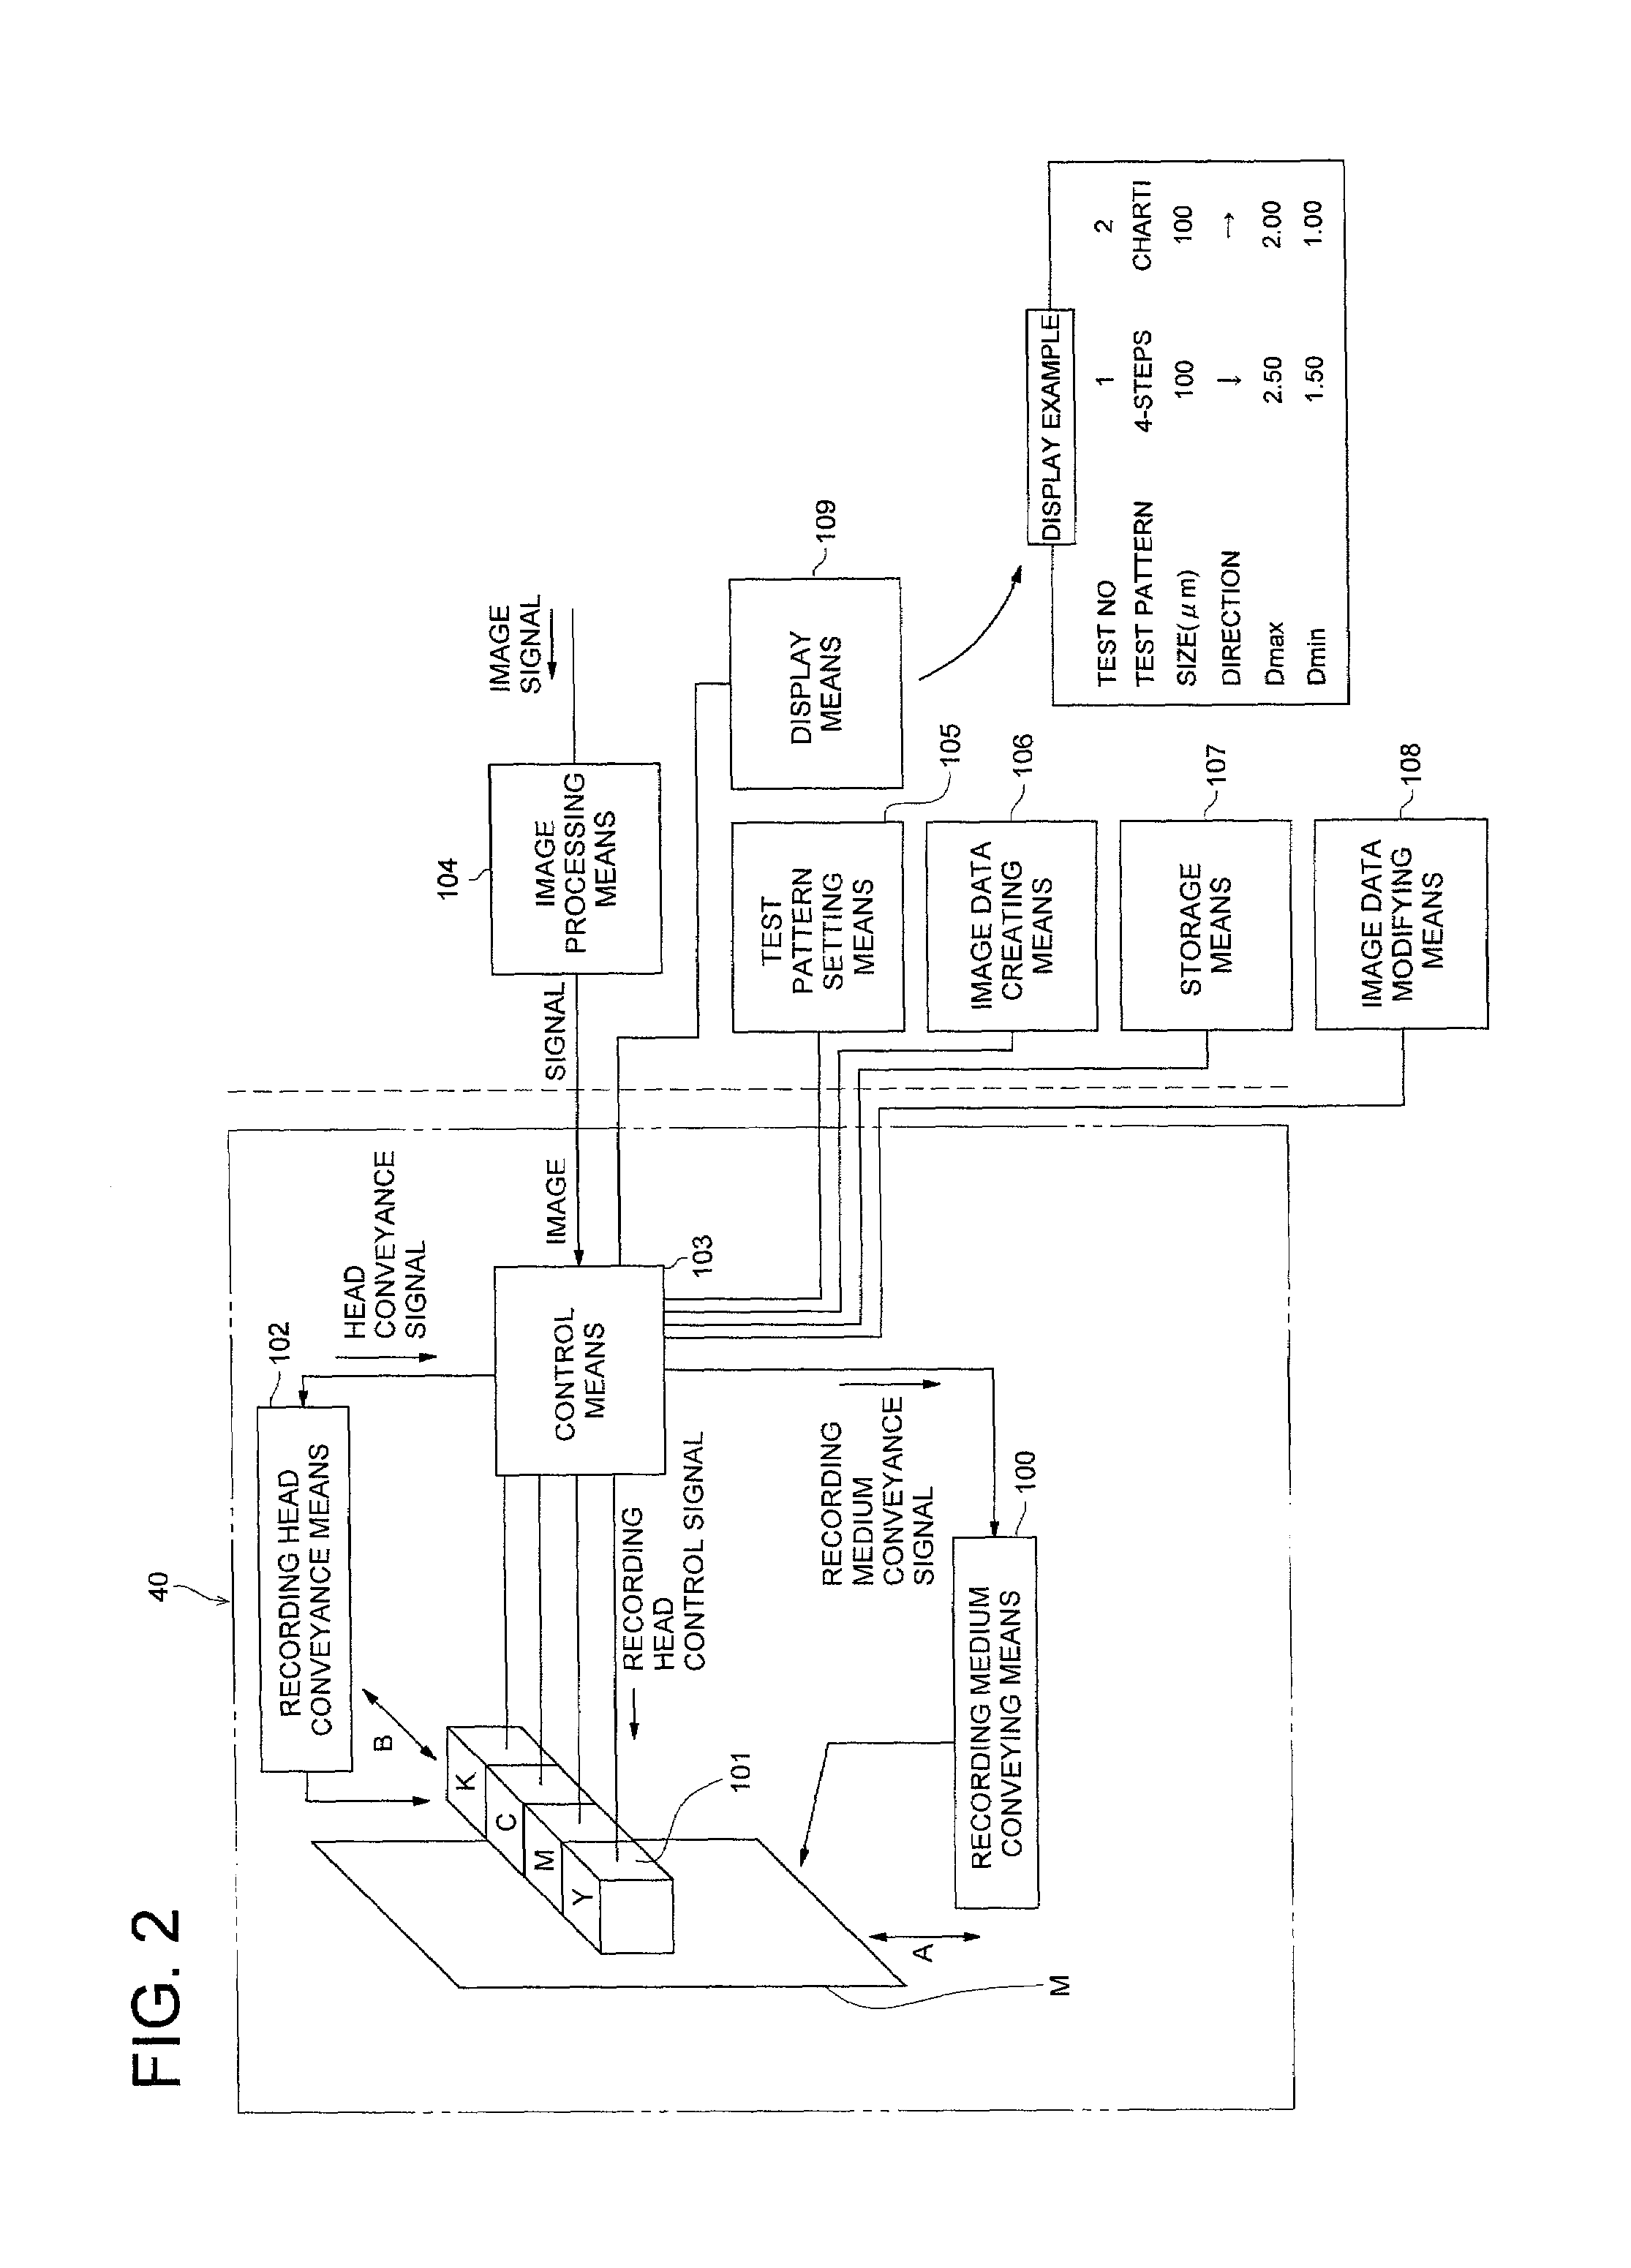 Image recording apparatus and test pattern for evaluating recorded image